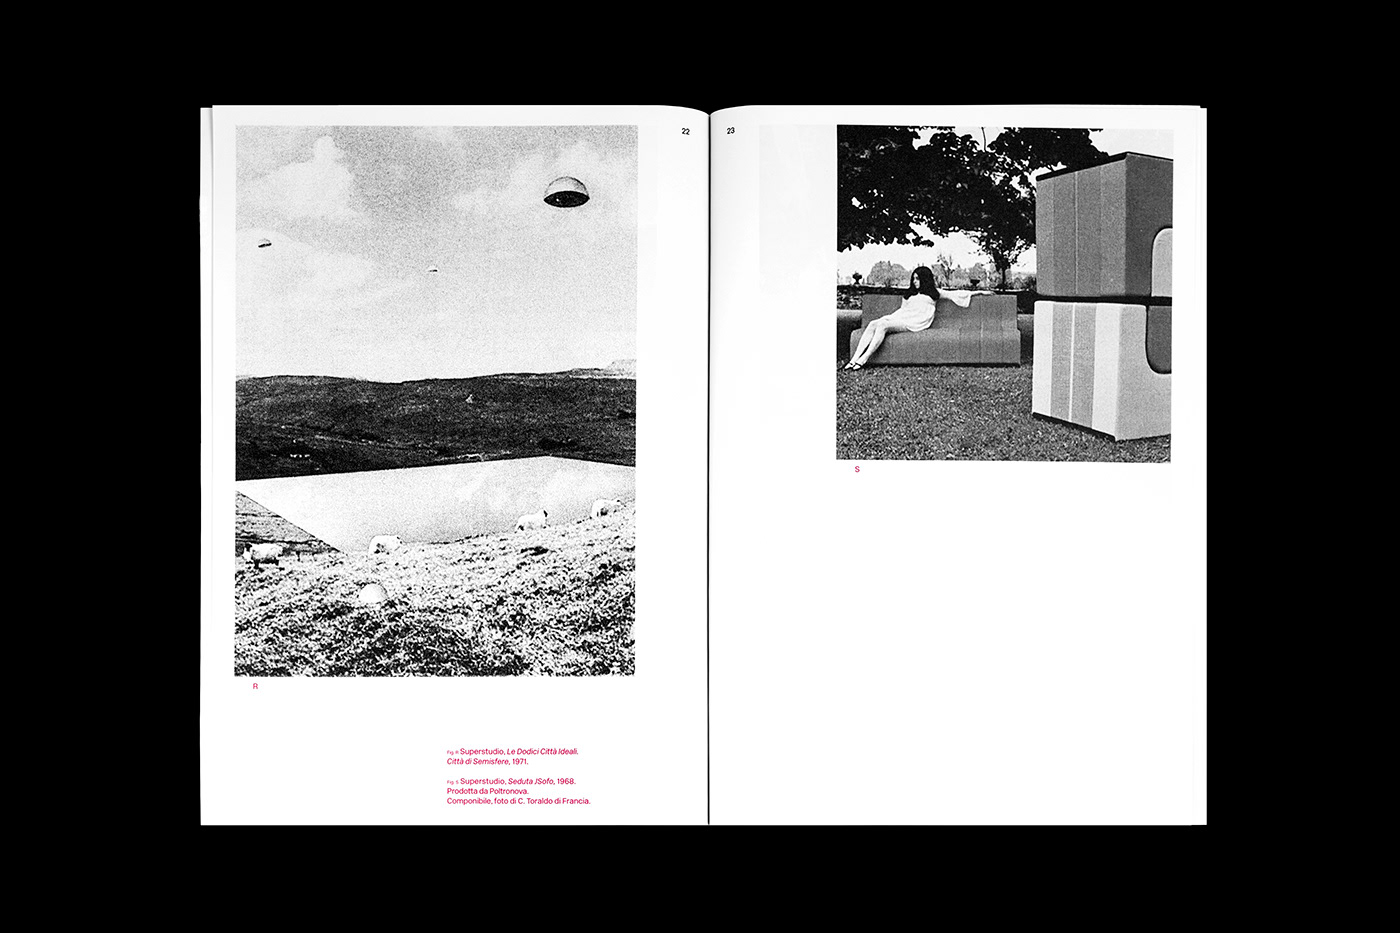 book design editorial graphic invisible structures ISIA Urbino Layout photo Project radical design